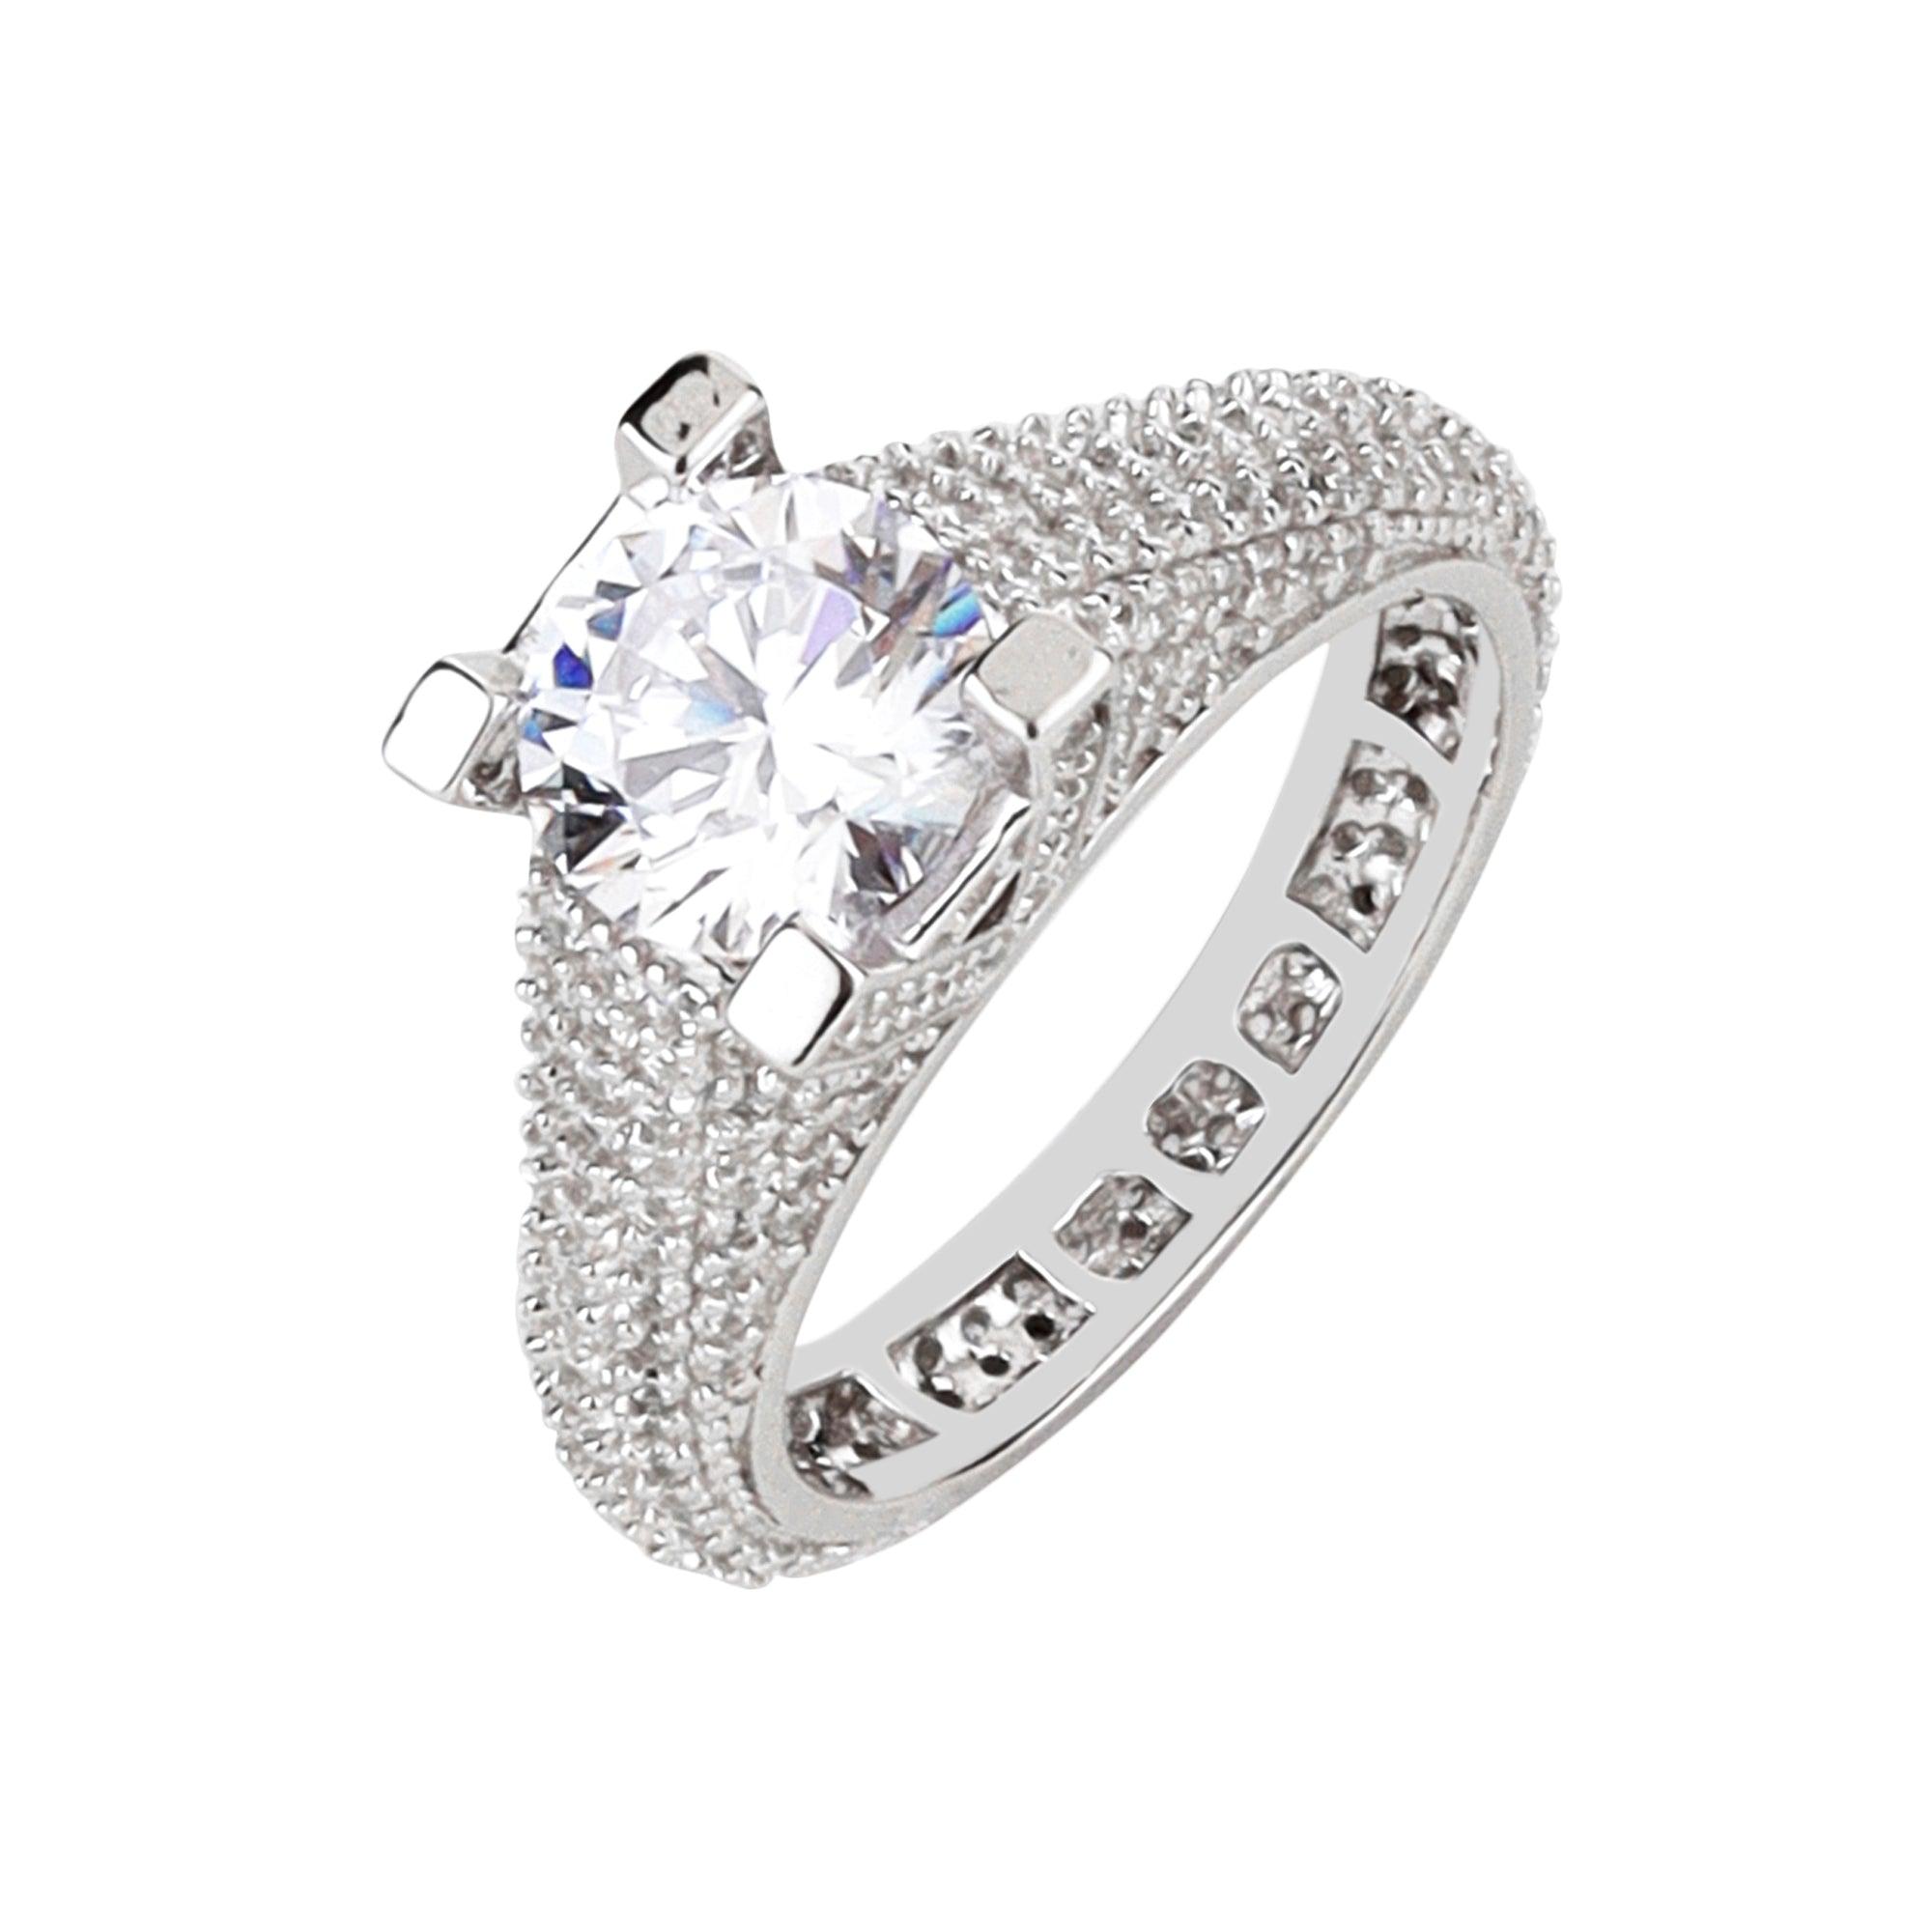 Special Luxury Stone Studded Ornate Ring - silvermark